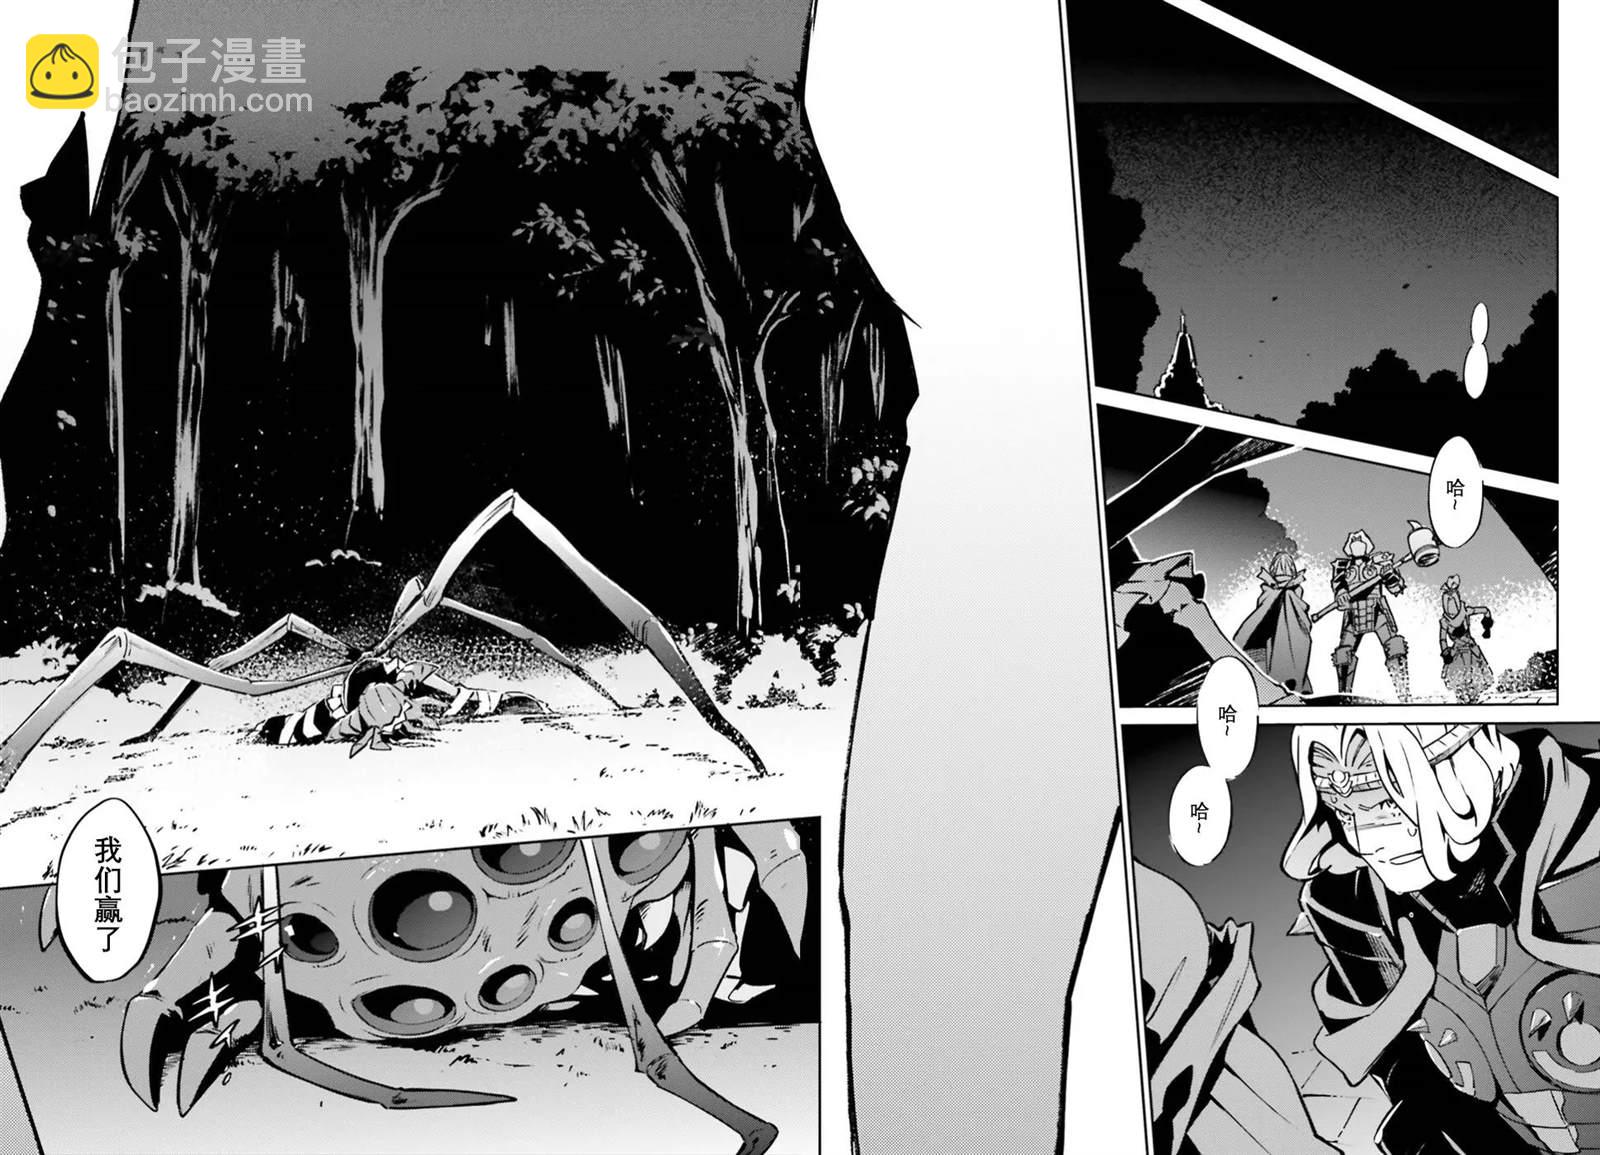 OVERLORD - 第46话 - 2